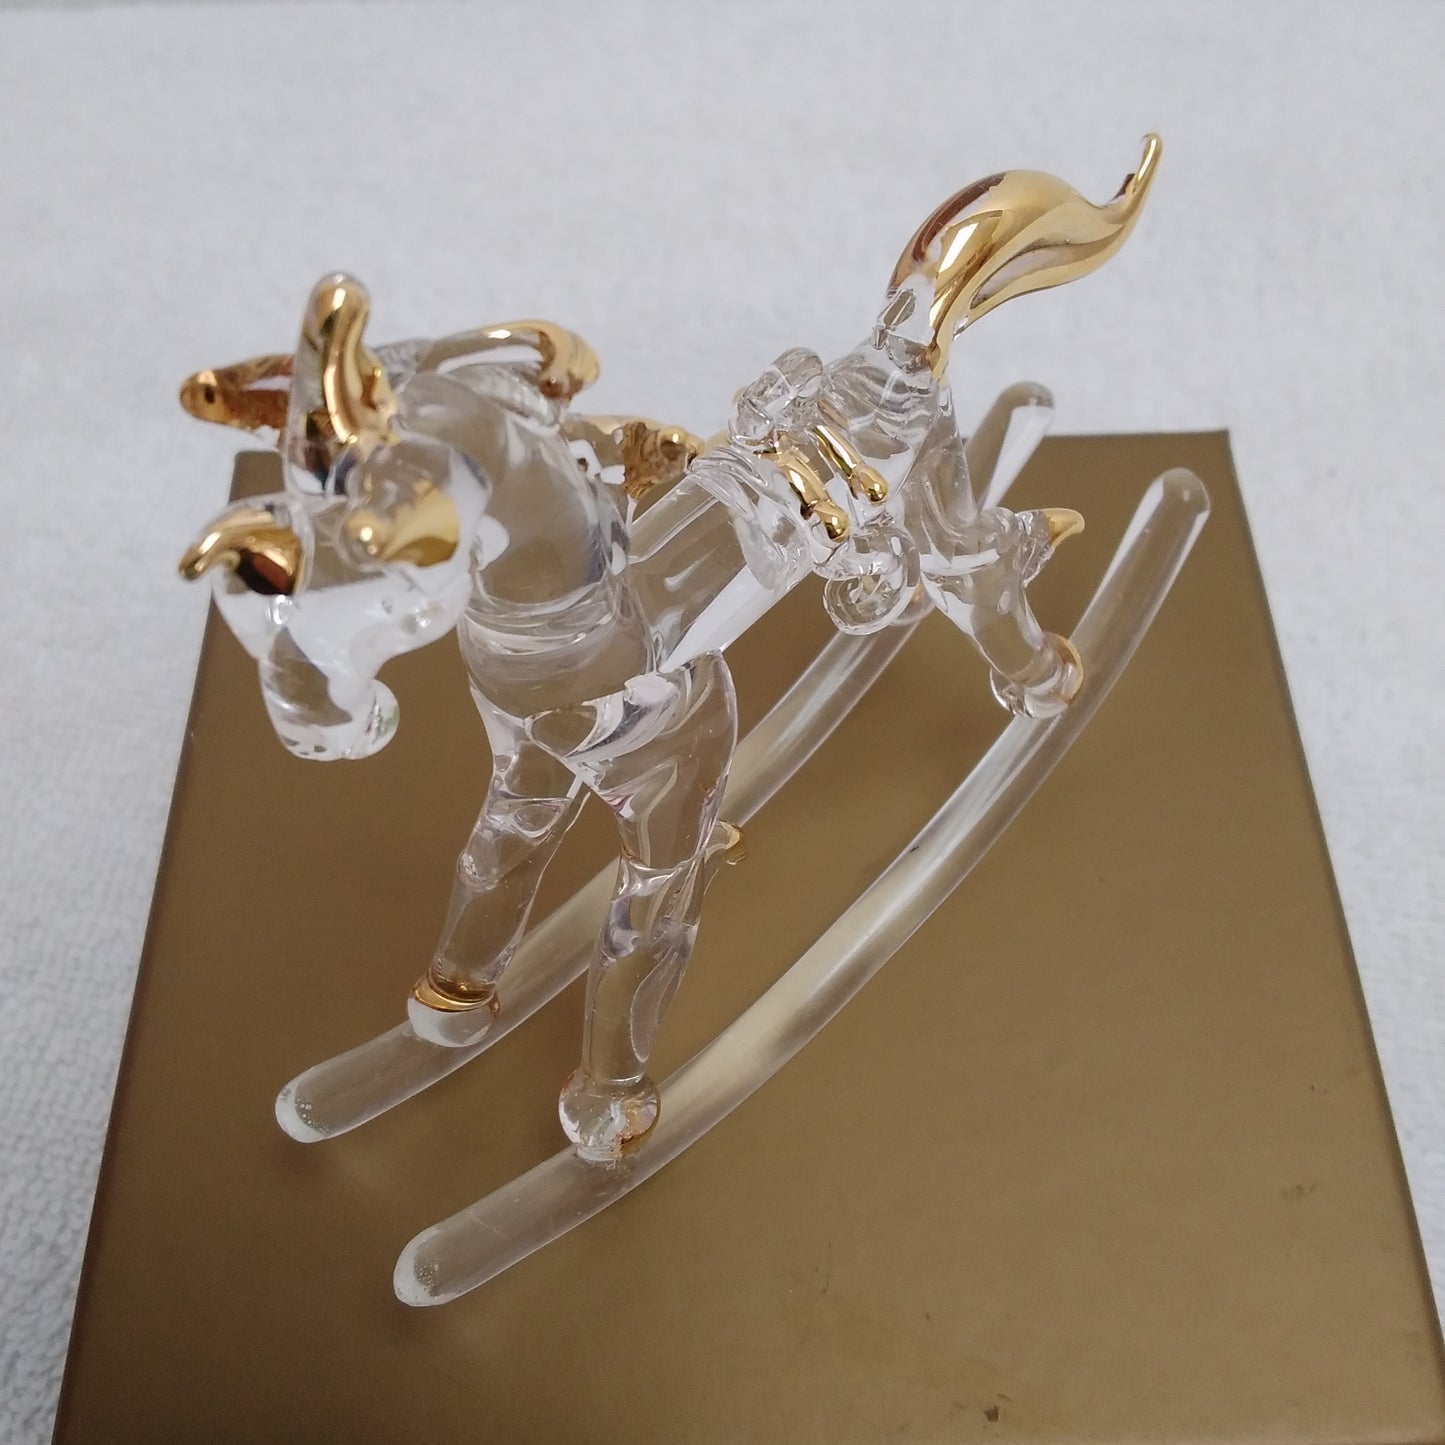 Pier 1 Imports Glass Rocking Horse with Gold Trim Christmas Ornament